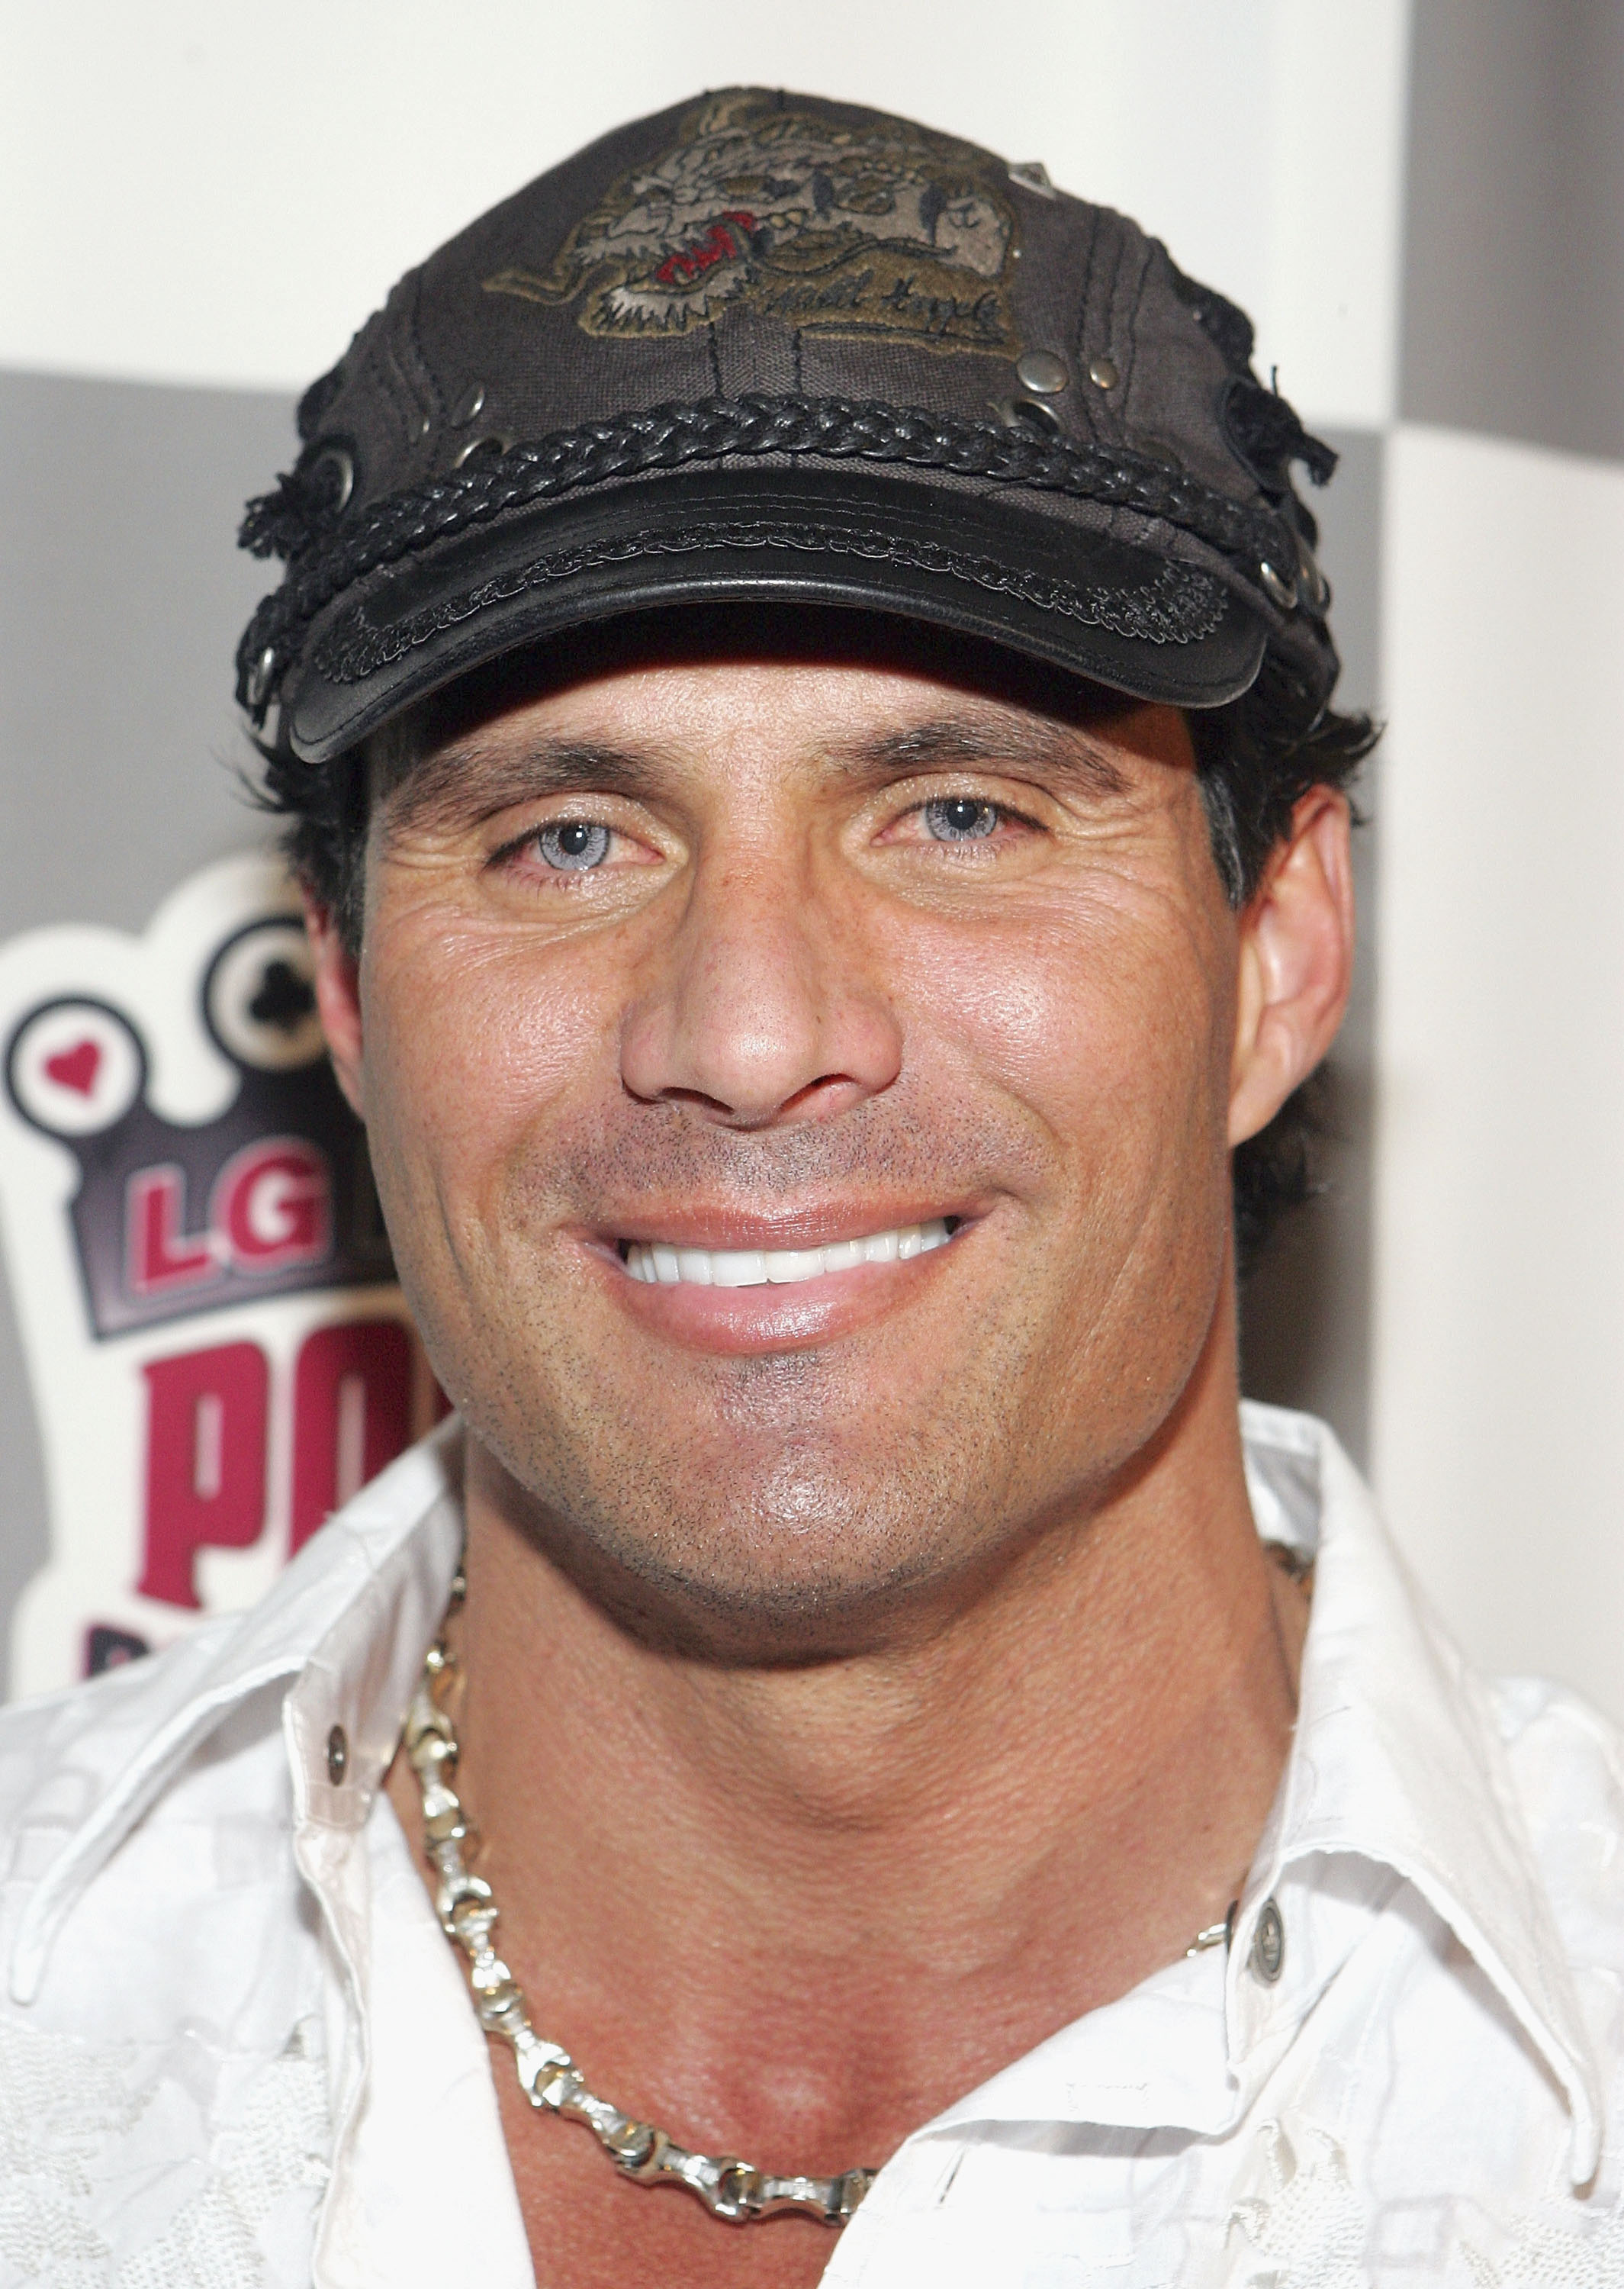 Jose Canseco's 20 Craziest Moments | Bleacher Report | Latest News, Videos and Highlights2129 x 3000